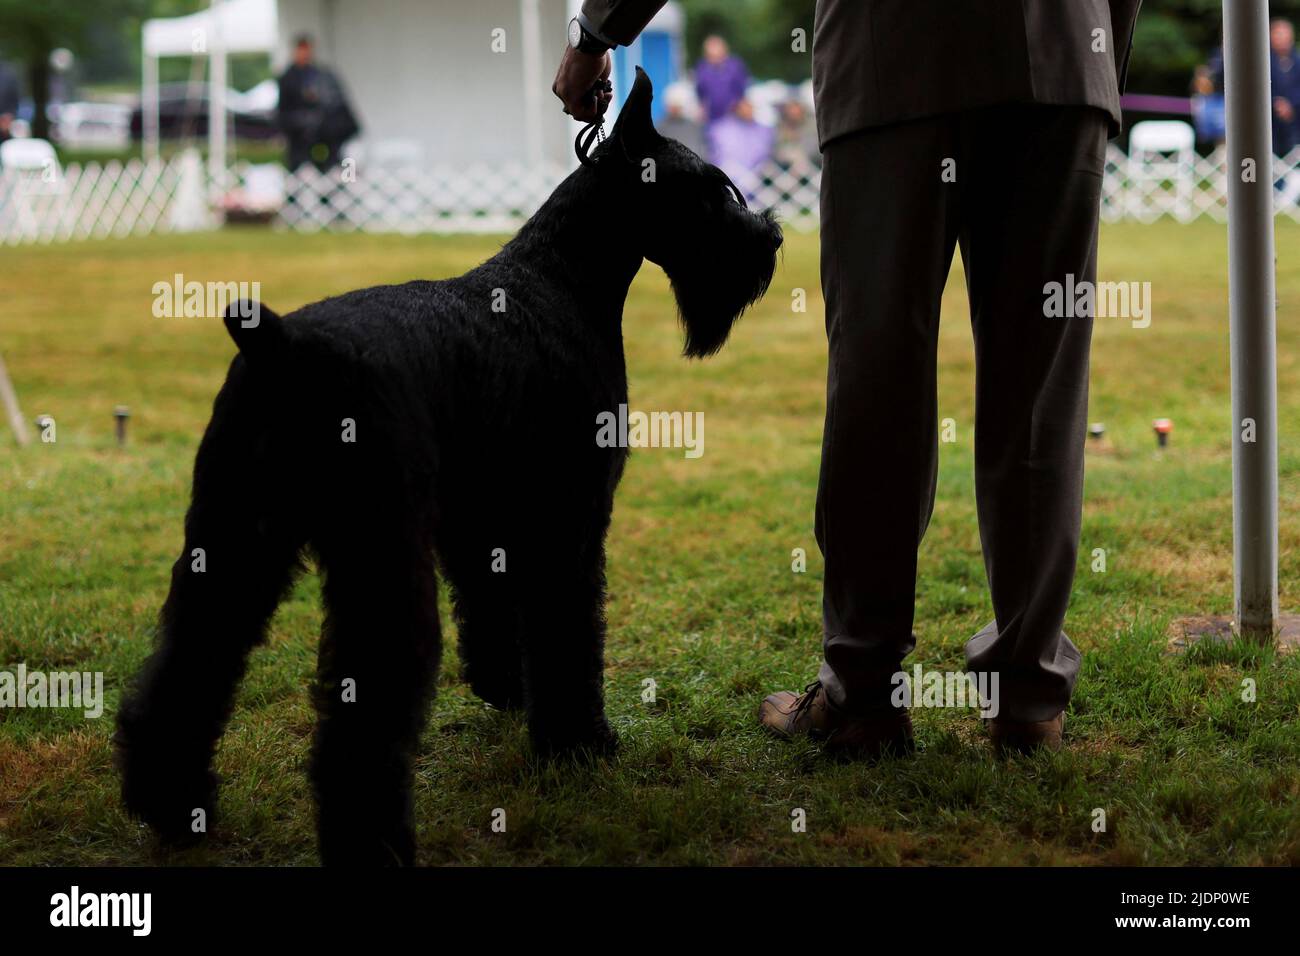 A Giant Schnauzer dog stands with its handler during breed judging competition at the 146th Westminster Kennel Club Dog Show at the Lyndhurst Estate in Tarrytown, New York, U.S., June 22, 2022. REUTERS/Mike Segar Stock Photo